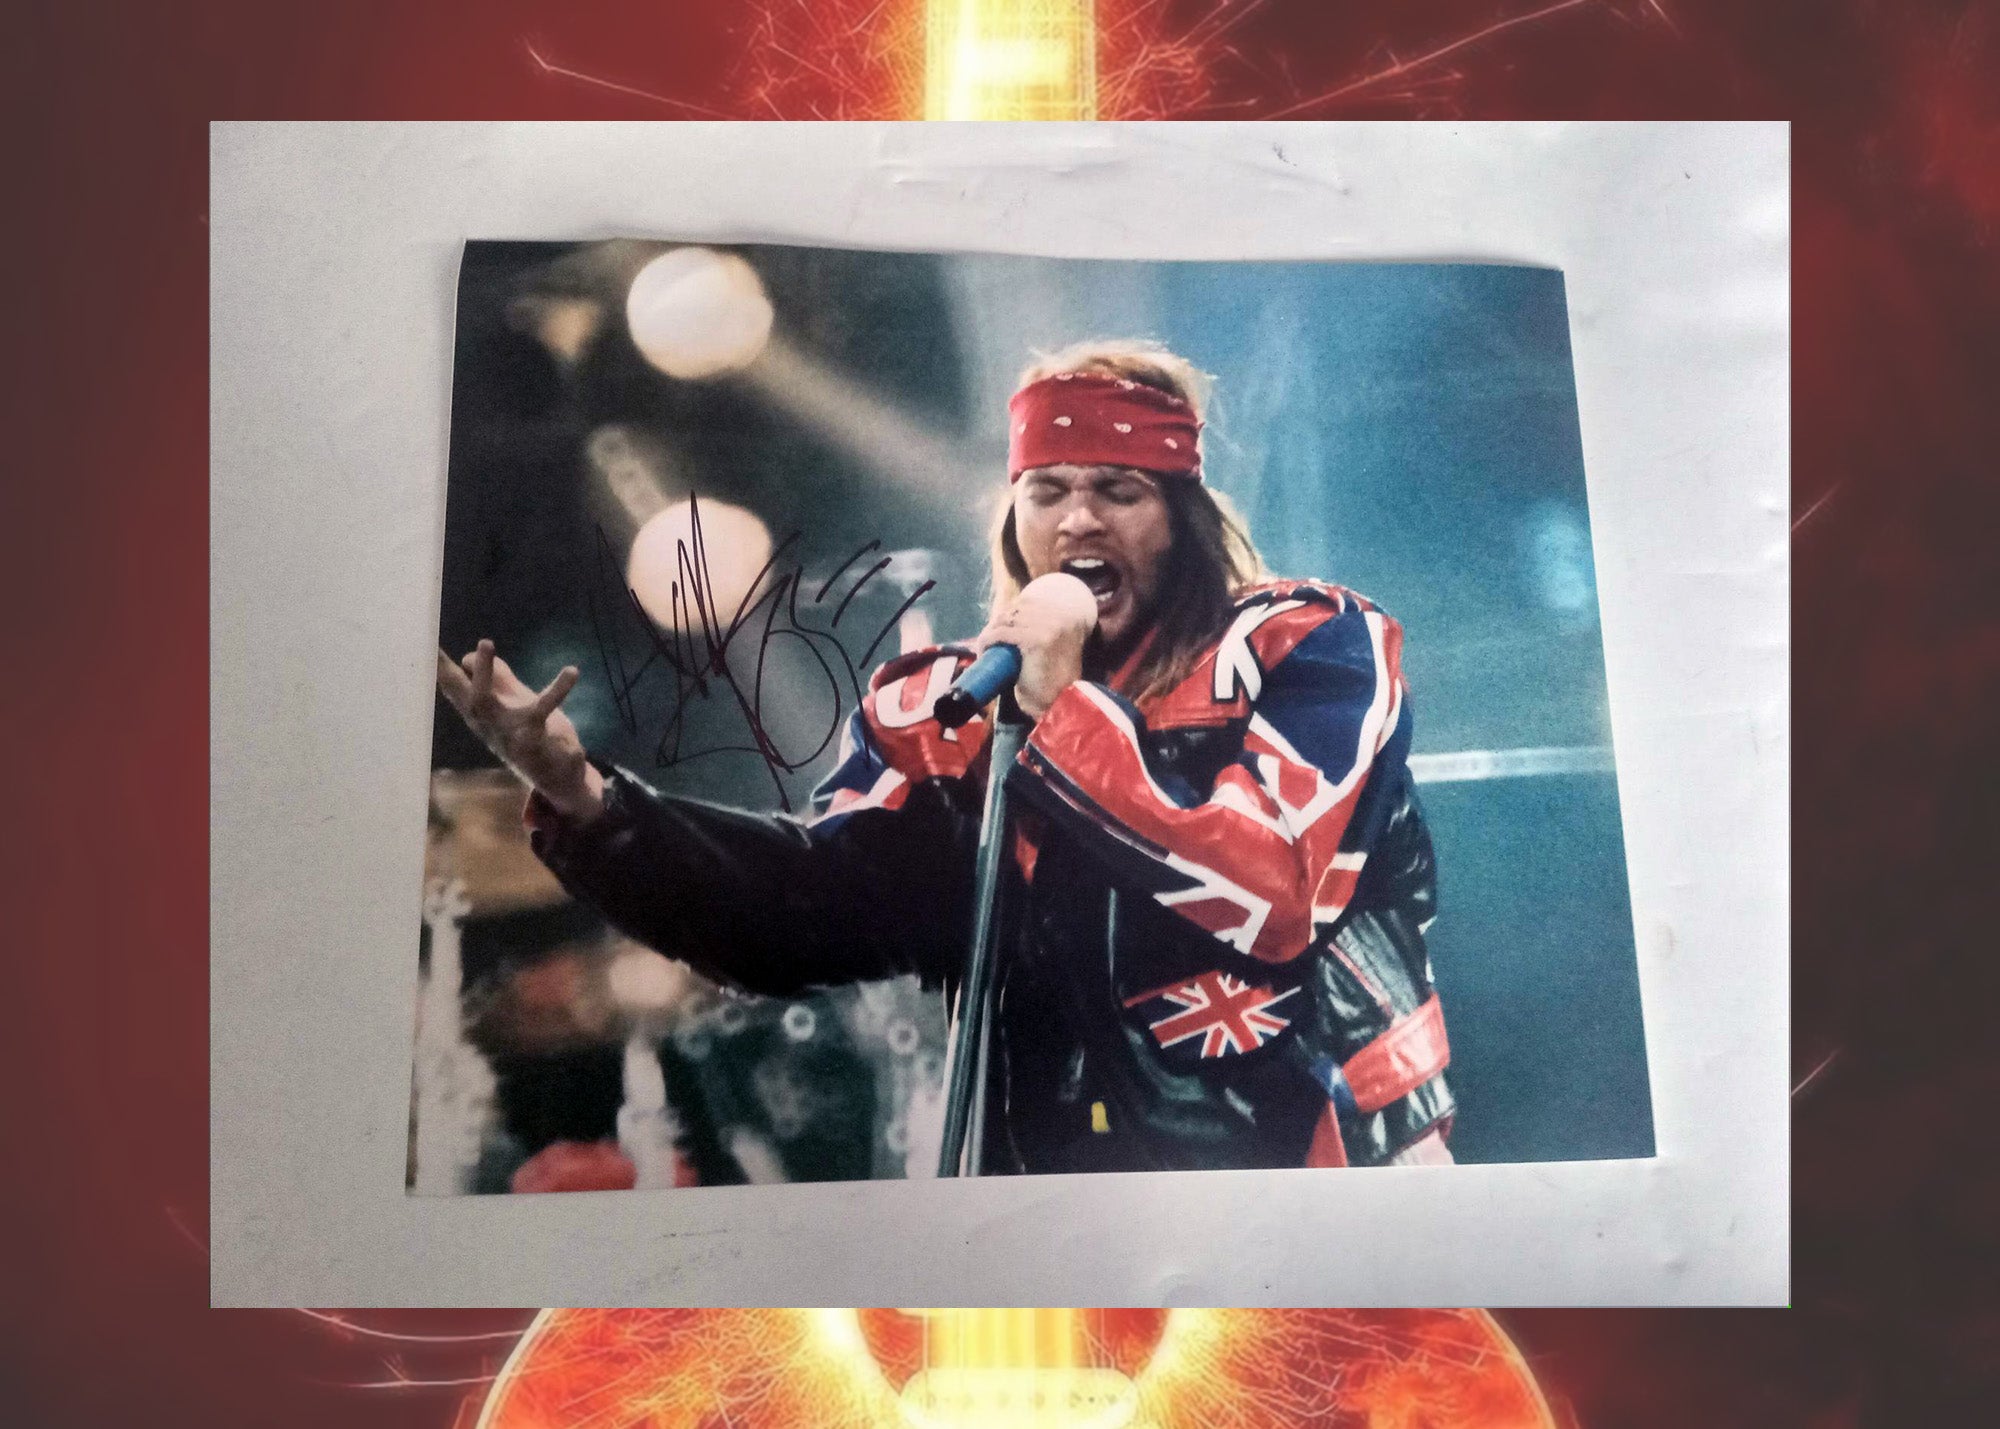 W. Axl Rose Guns N Roses 8 x 10 photo signed with proof